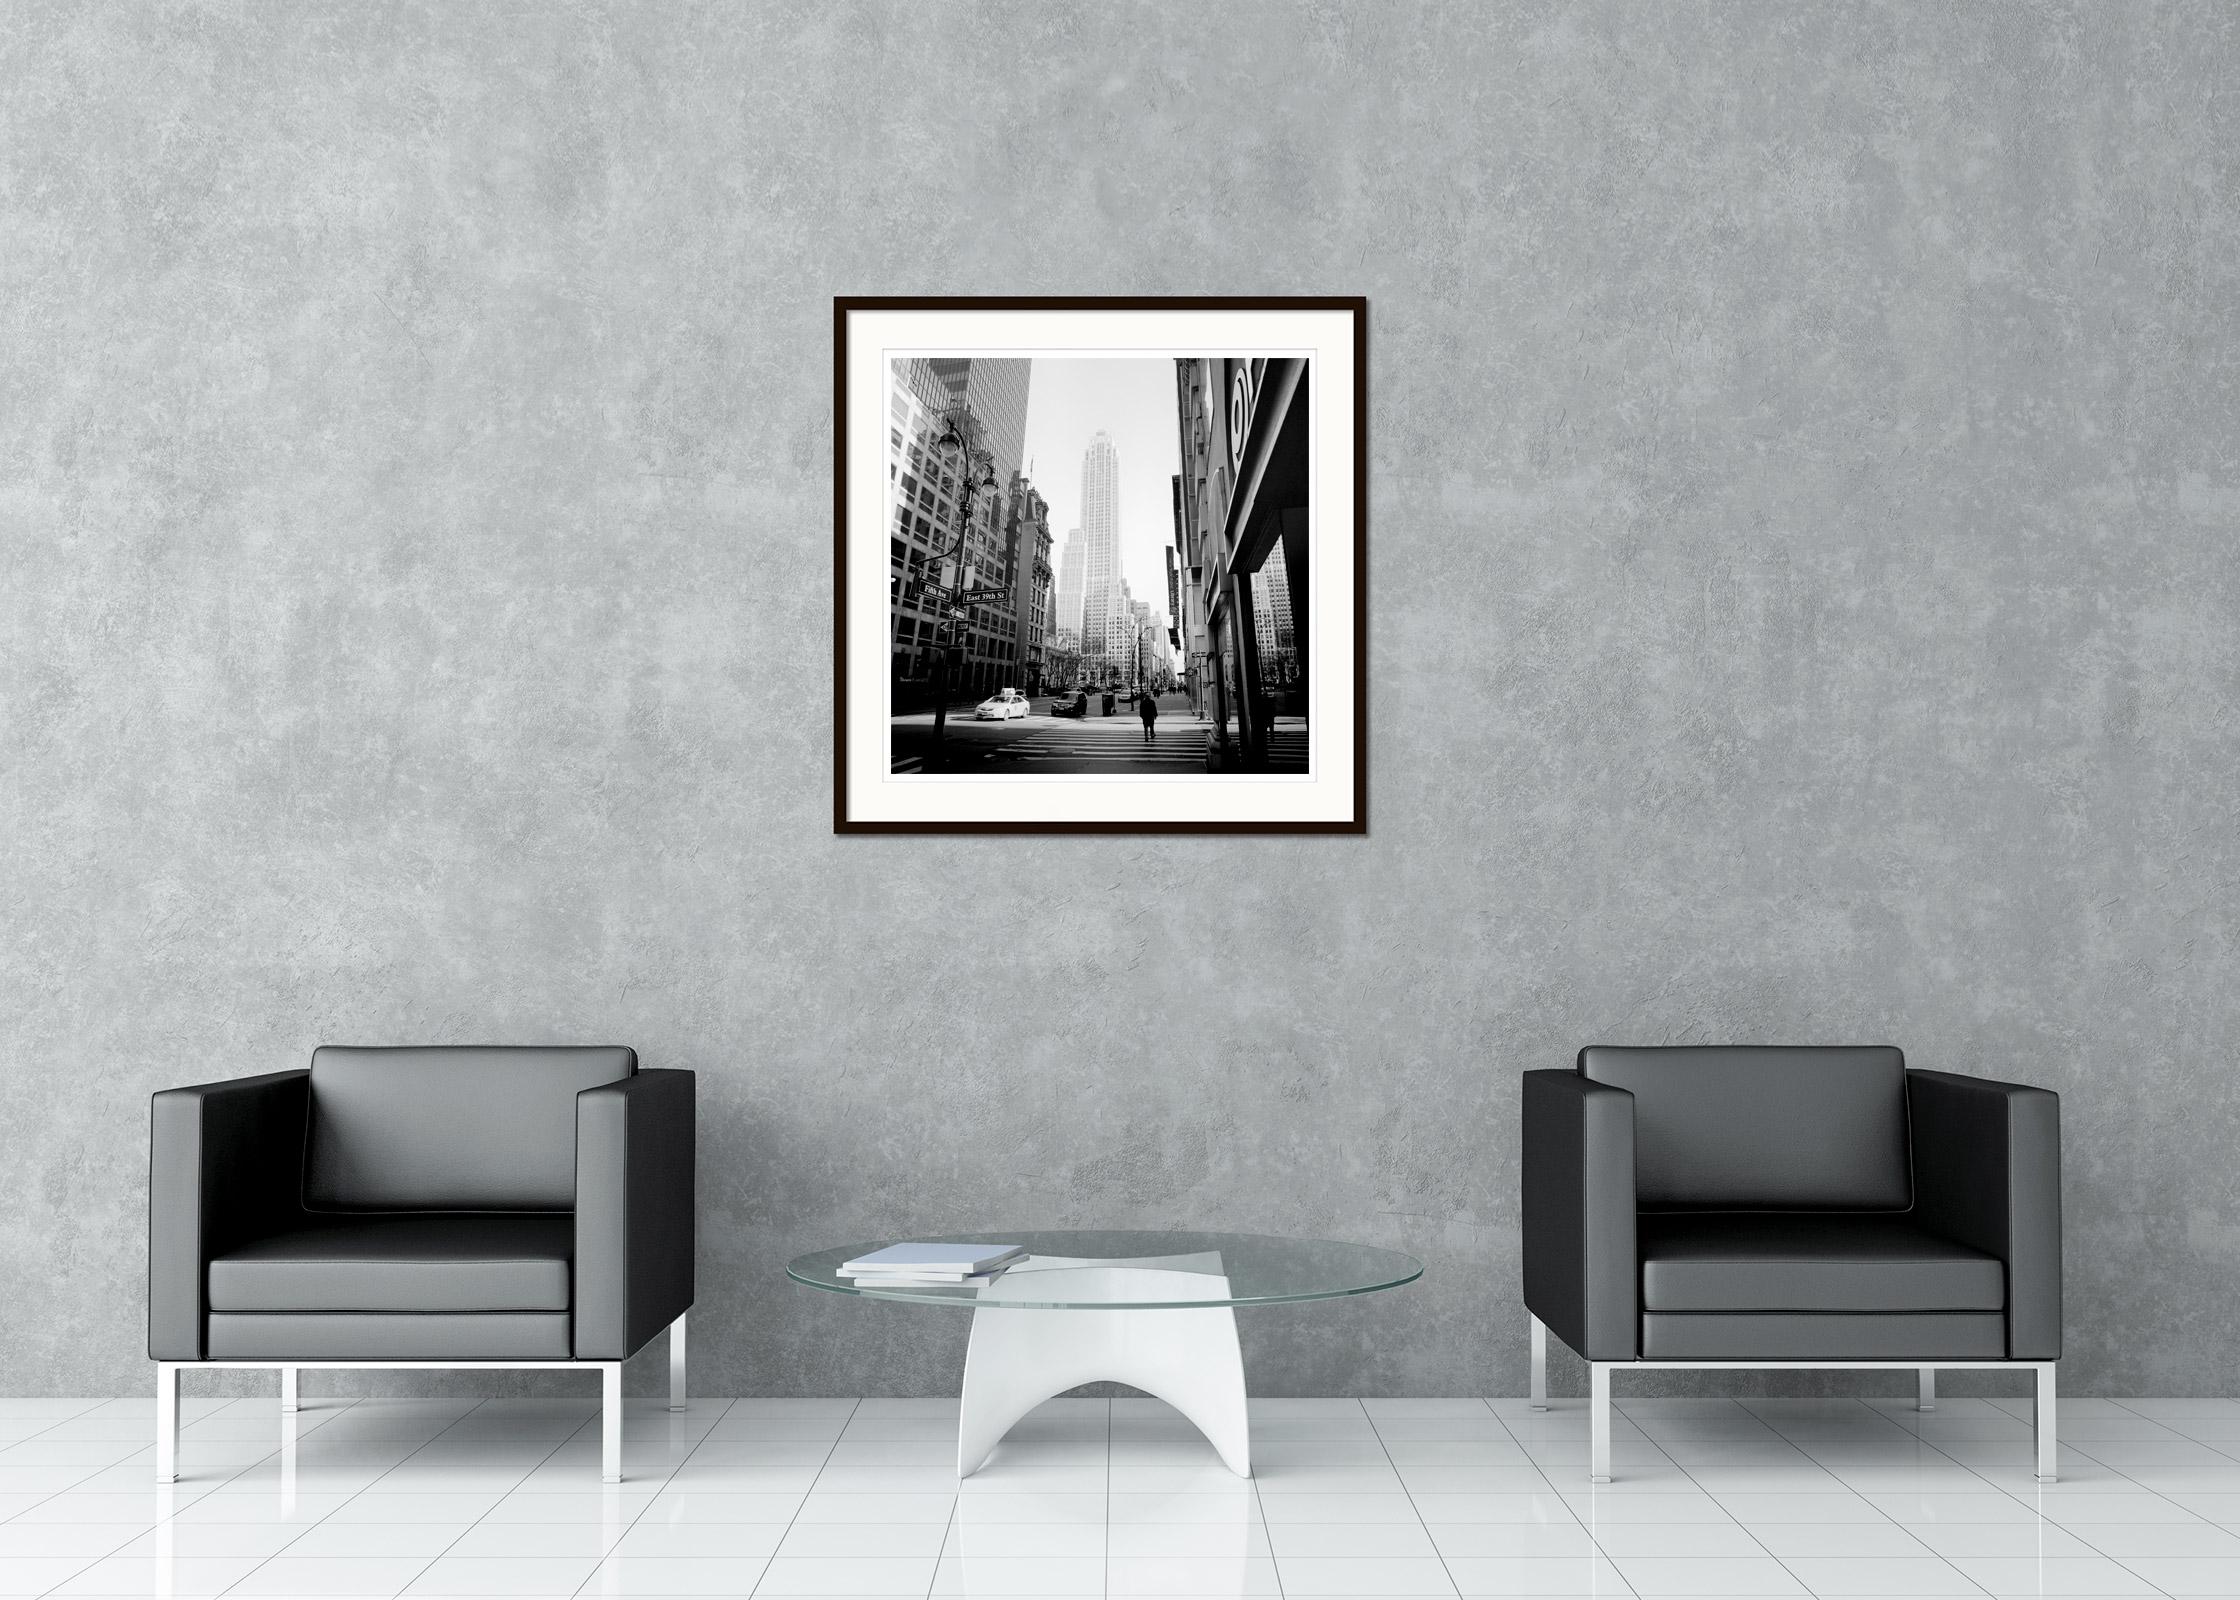 Black and white fine art cityscape photography. Fifth Ave, East 39th St, New York City with a view of the Empire State Building. Archival pigment ink print, edition of 9. Signed, titled, dated and numbered by artist. Certificate of authenticity